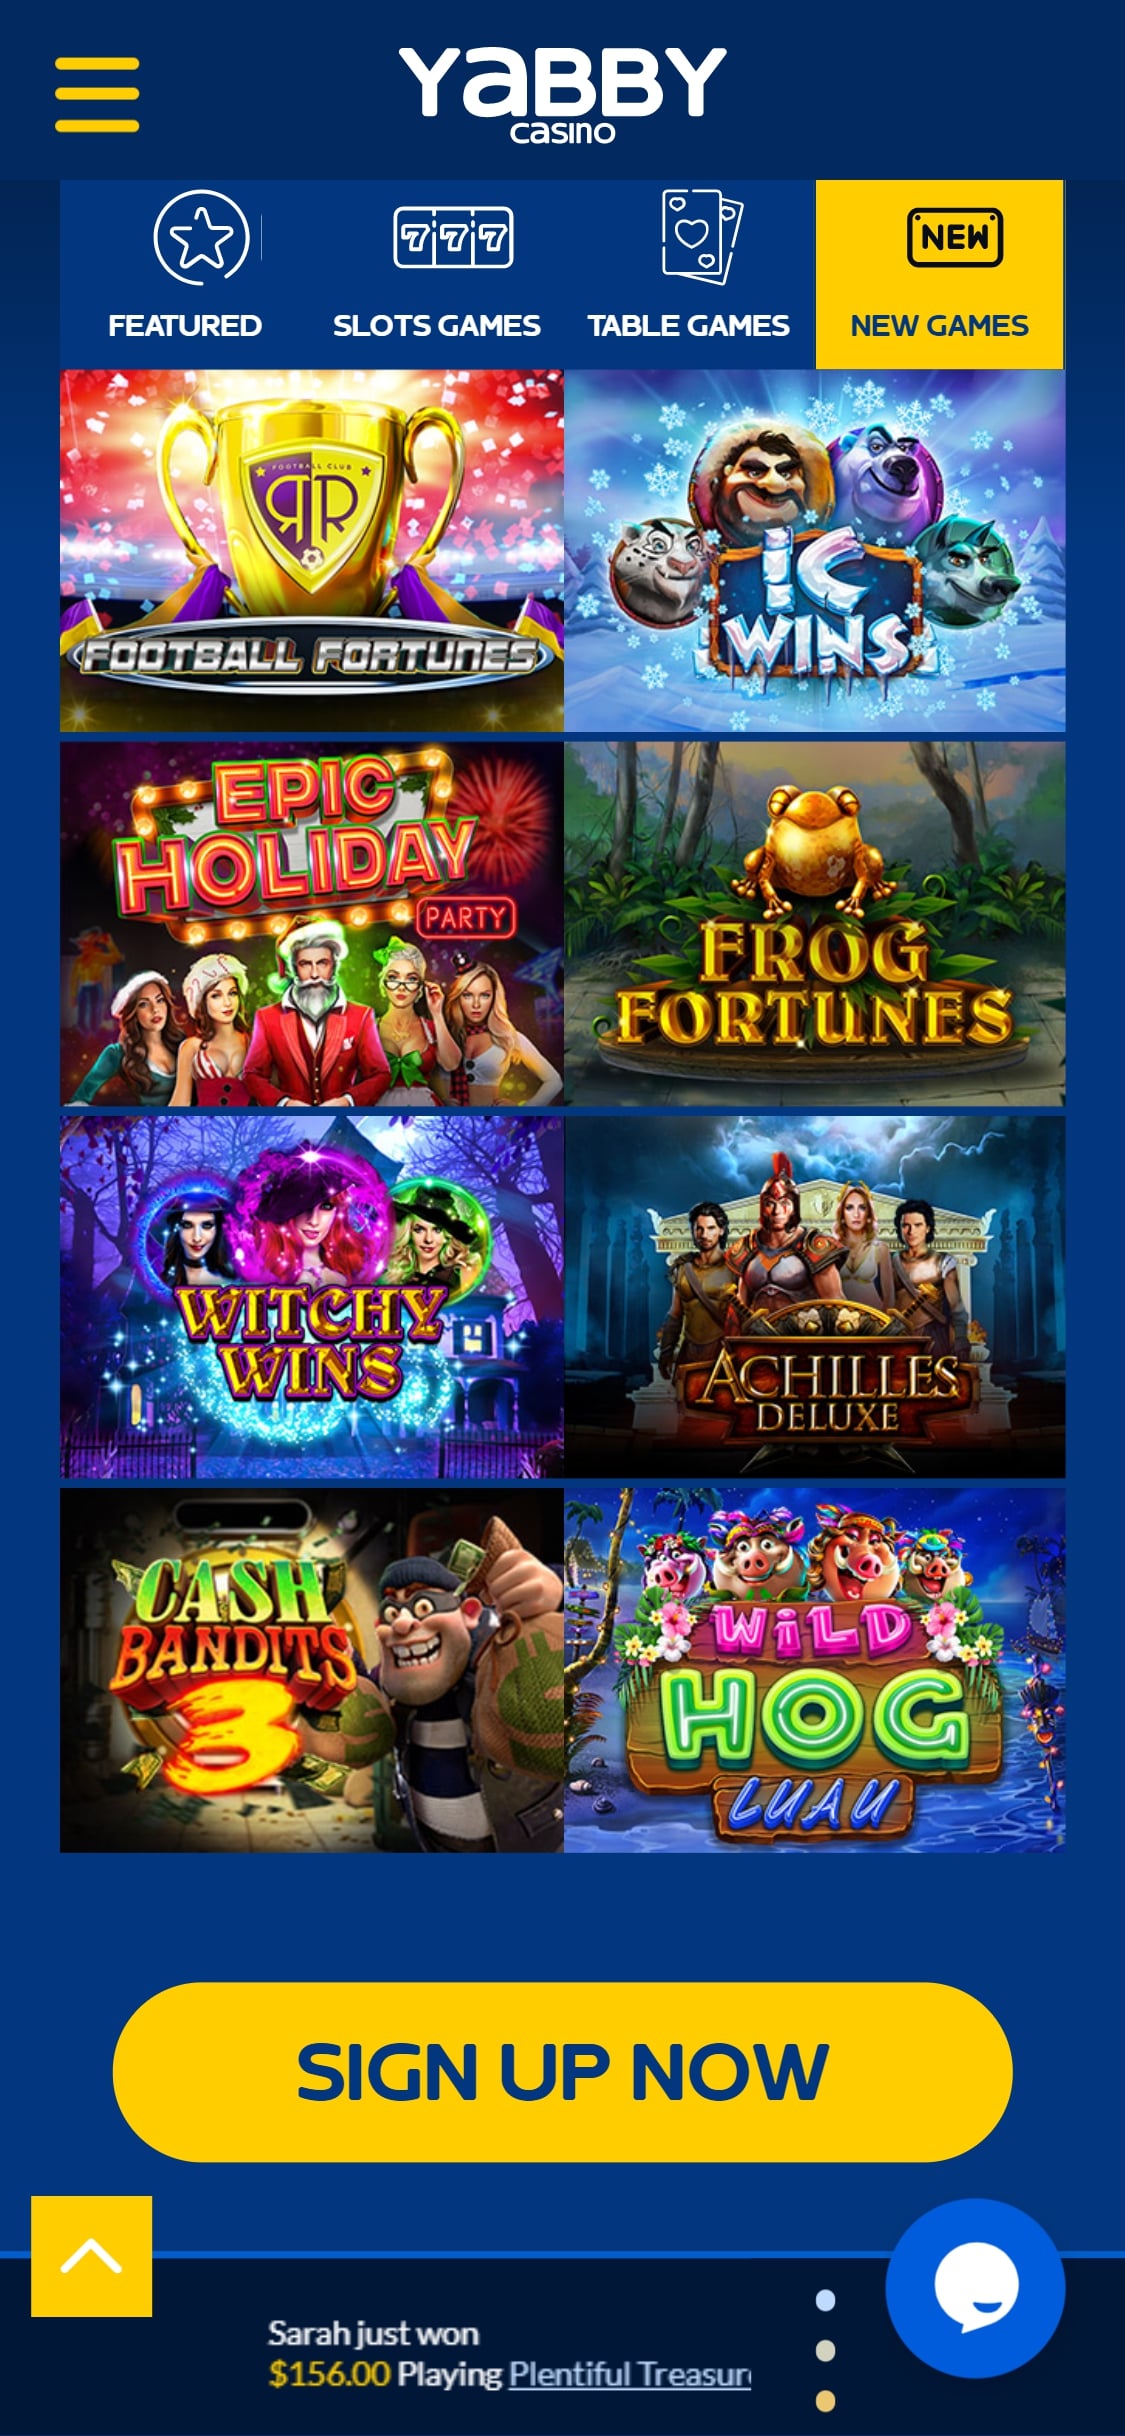 Yabby Casino Mobile Games Review